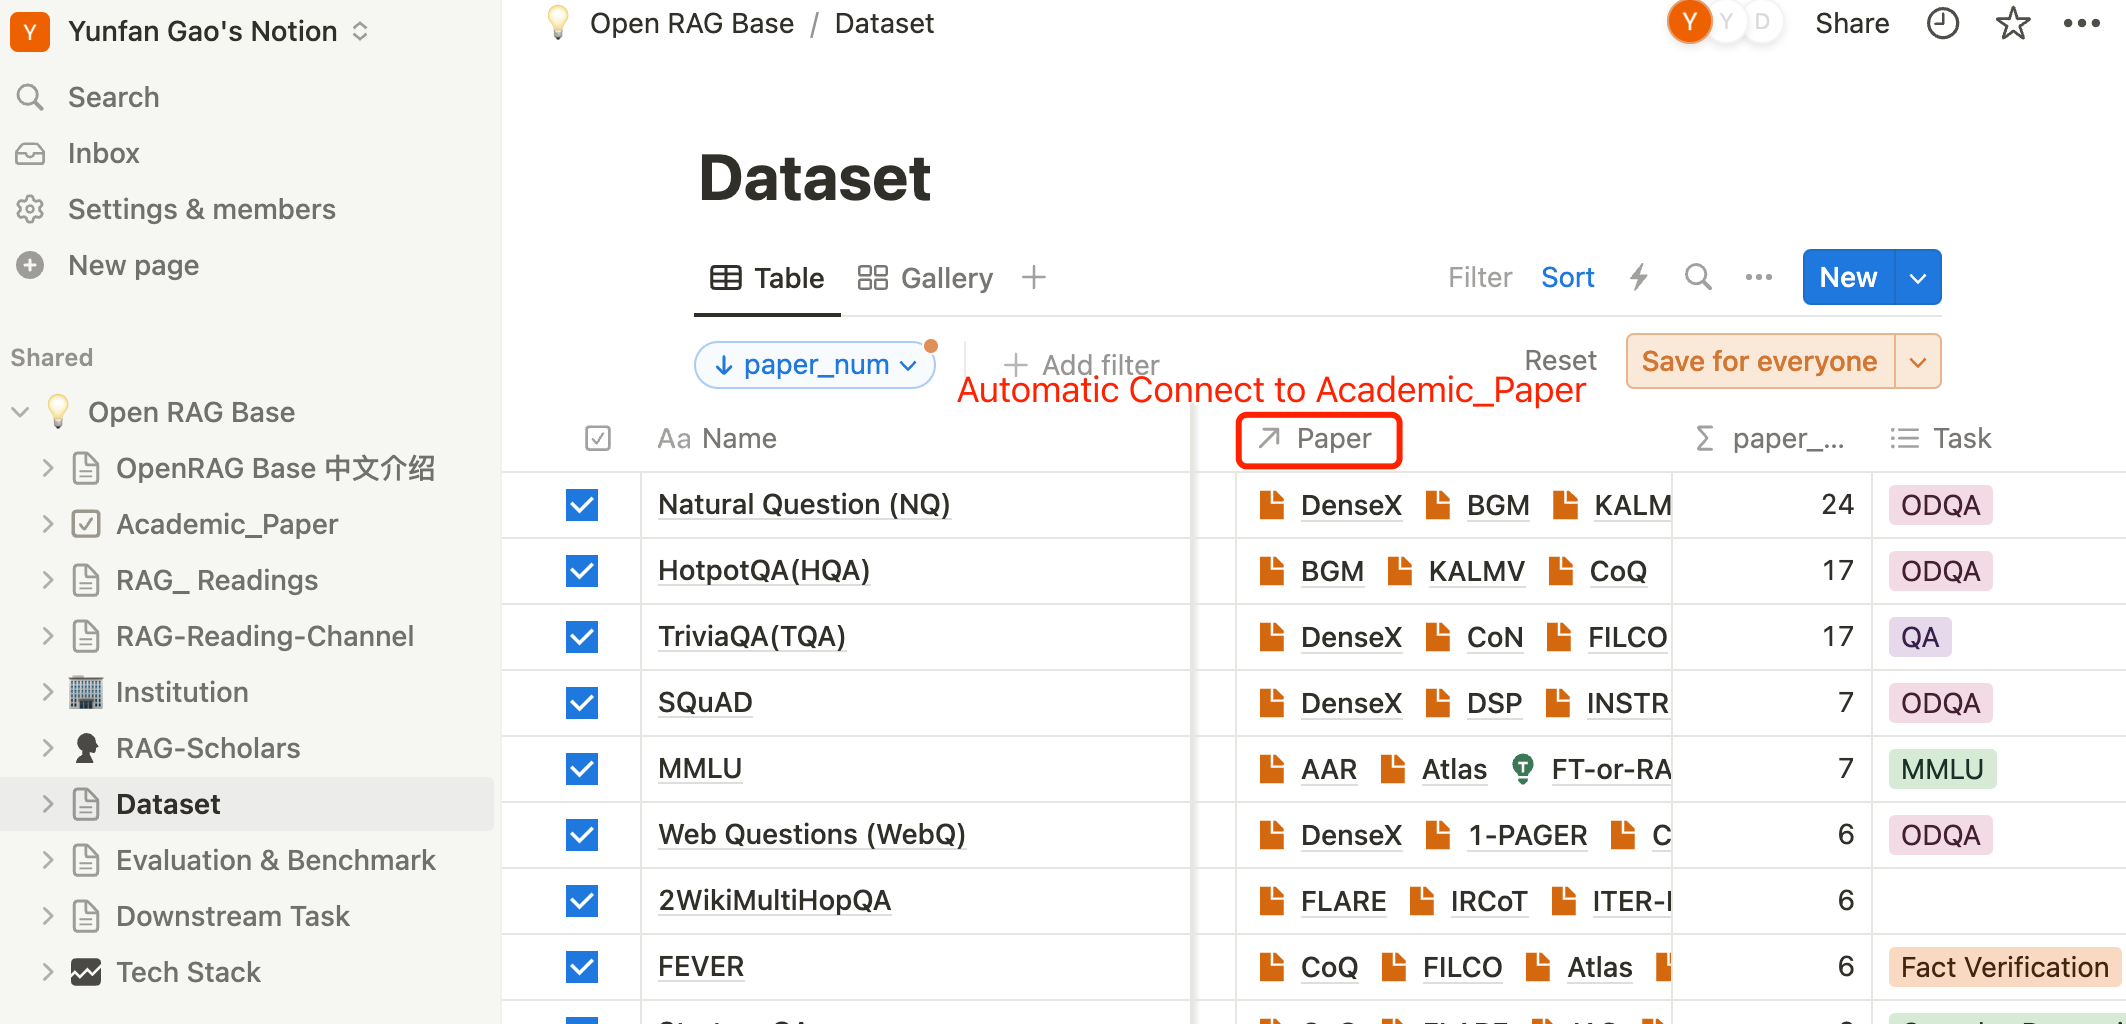 In a bidirectional relation, the Dataset table will automatically link to the primary key (Paper) in the associated table (Academic_paper) and update accordingly. This ensures that the data remains synchronized between the two databases and reflects any changes made in either database.